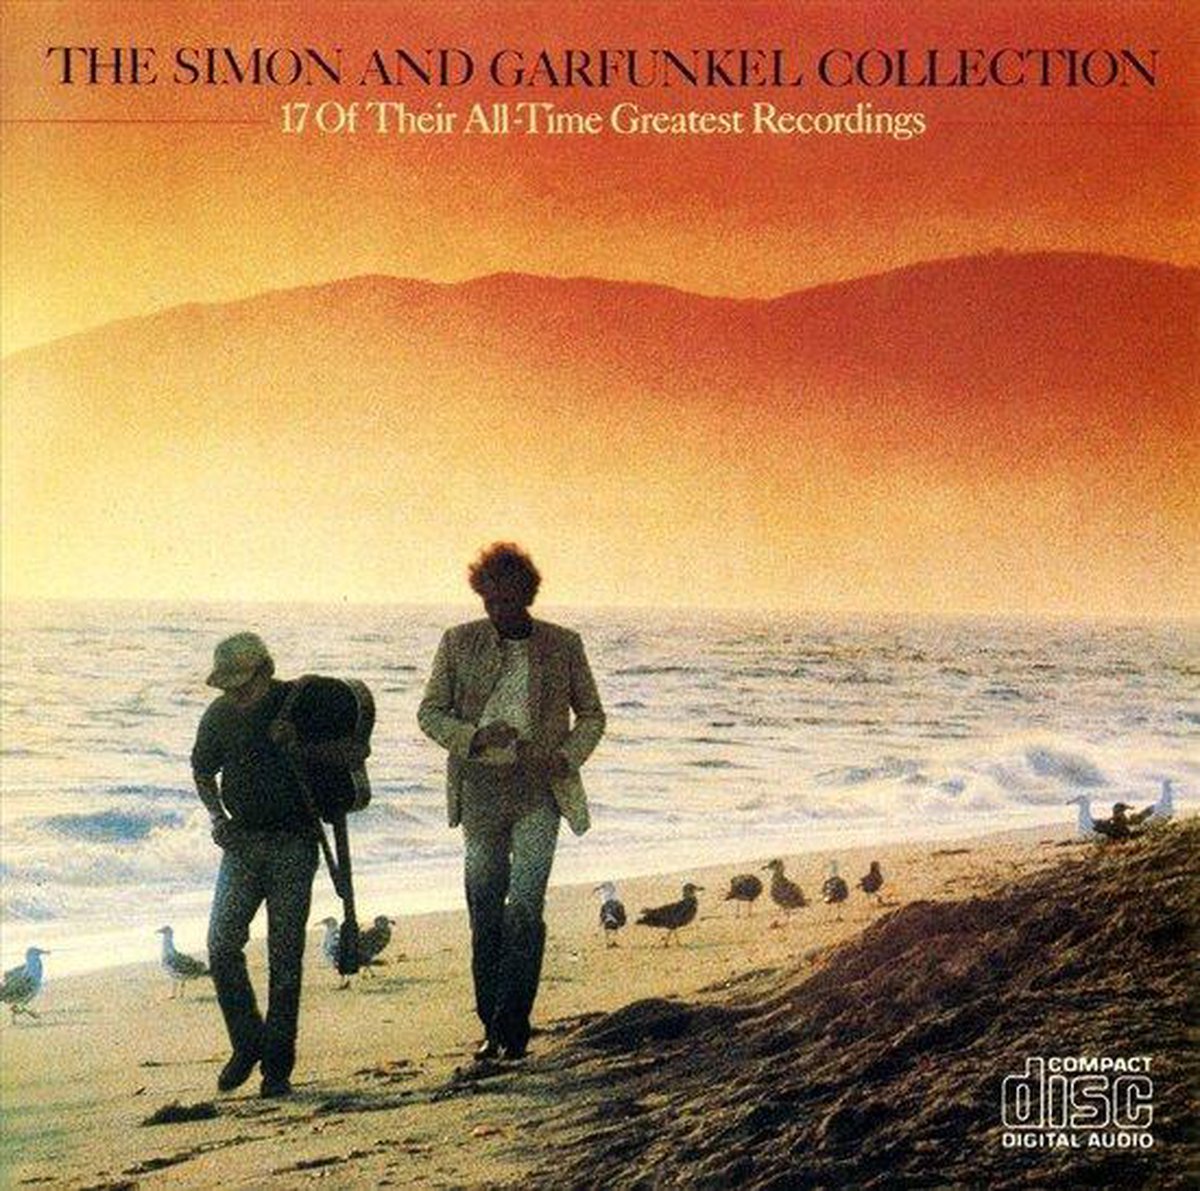 The Simon And Garfunkel Collection: 17 Of Their All-Time Greatest Recordings - Simon & Garfunkel